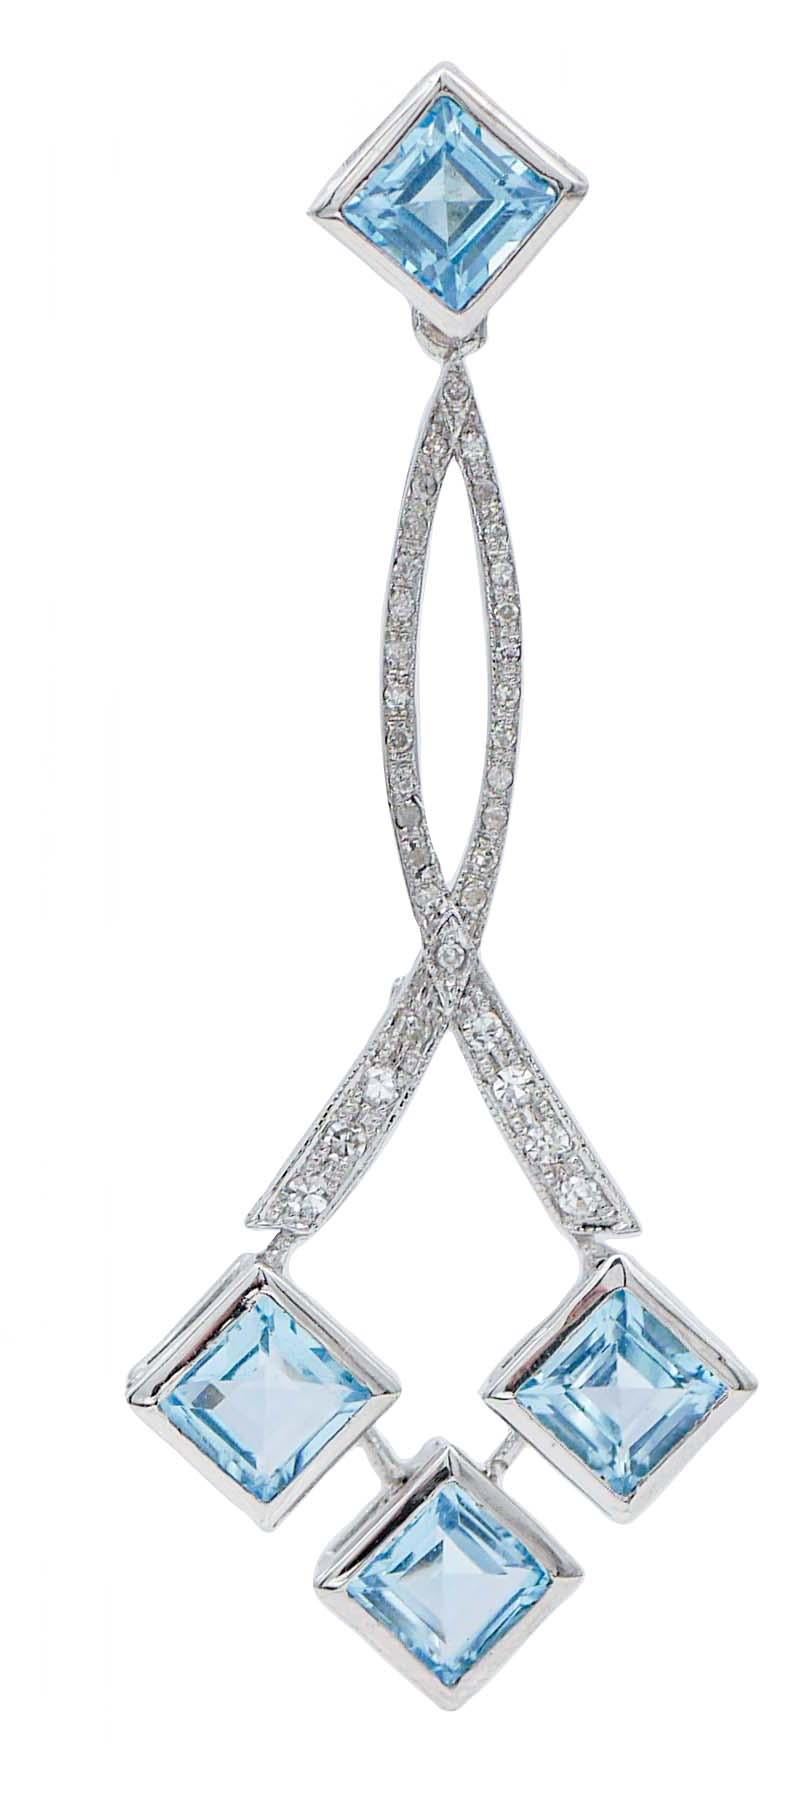 SHIPPING POLICY: 
No additional costs will be added to this order. 
Shipping costs will be totally covered by the seller (customs duties included).

Elegant dangle earrings in 14 kt white gold structure mounted with a topaz in the upper part; in the